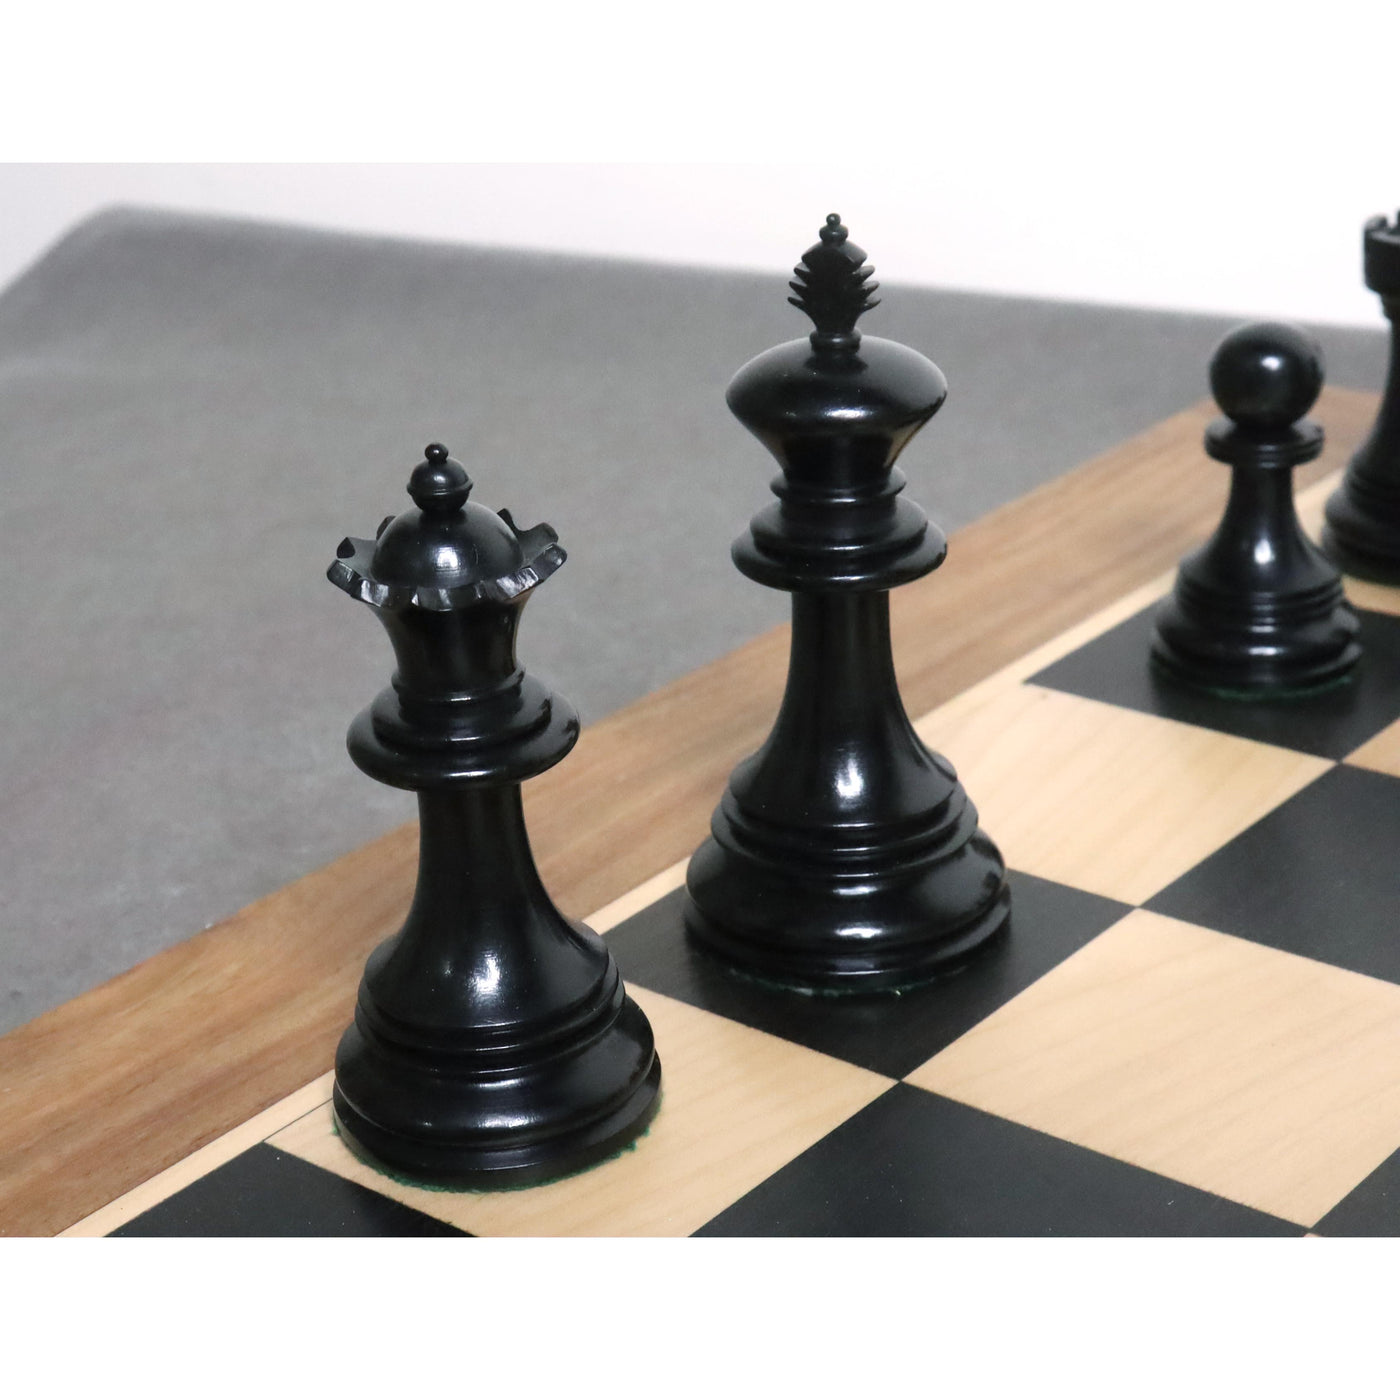 Slightly Imperfect 4.2" Luxury Patton Staunton Chess Pieces Only set -Ebony Wood -Triple Weighted